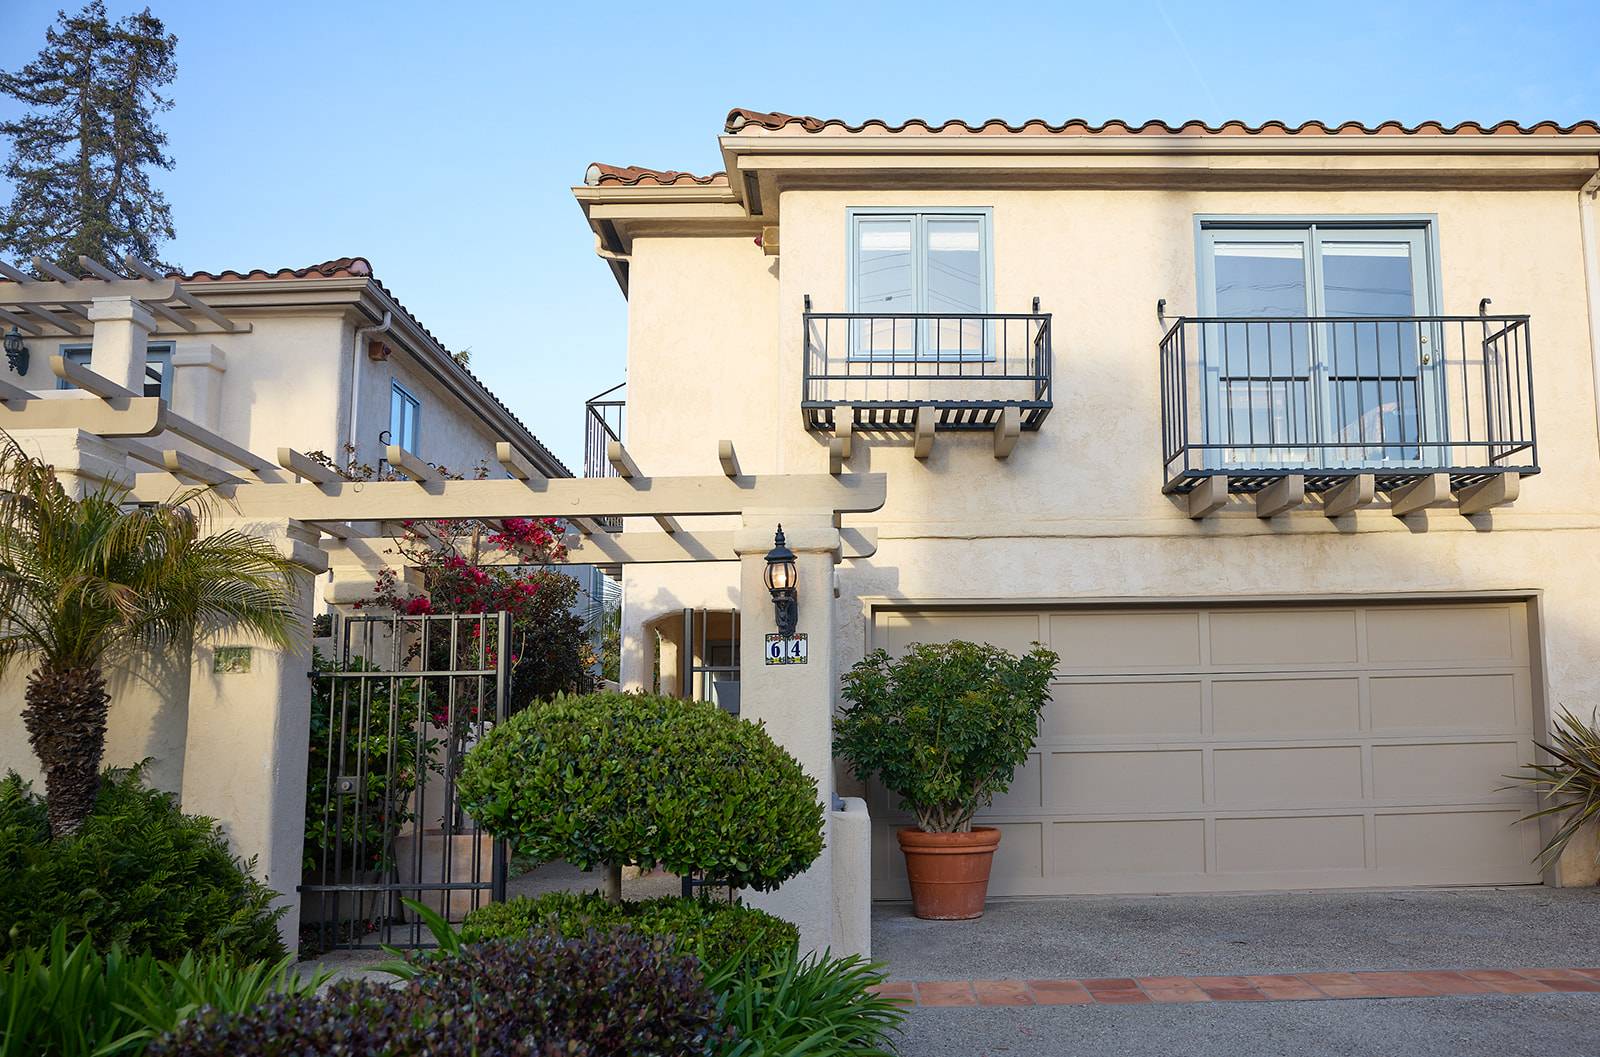 Montecito Location, Location, Location! Summer & Short Term Rental Available Year Round